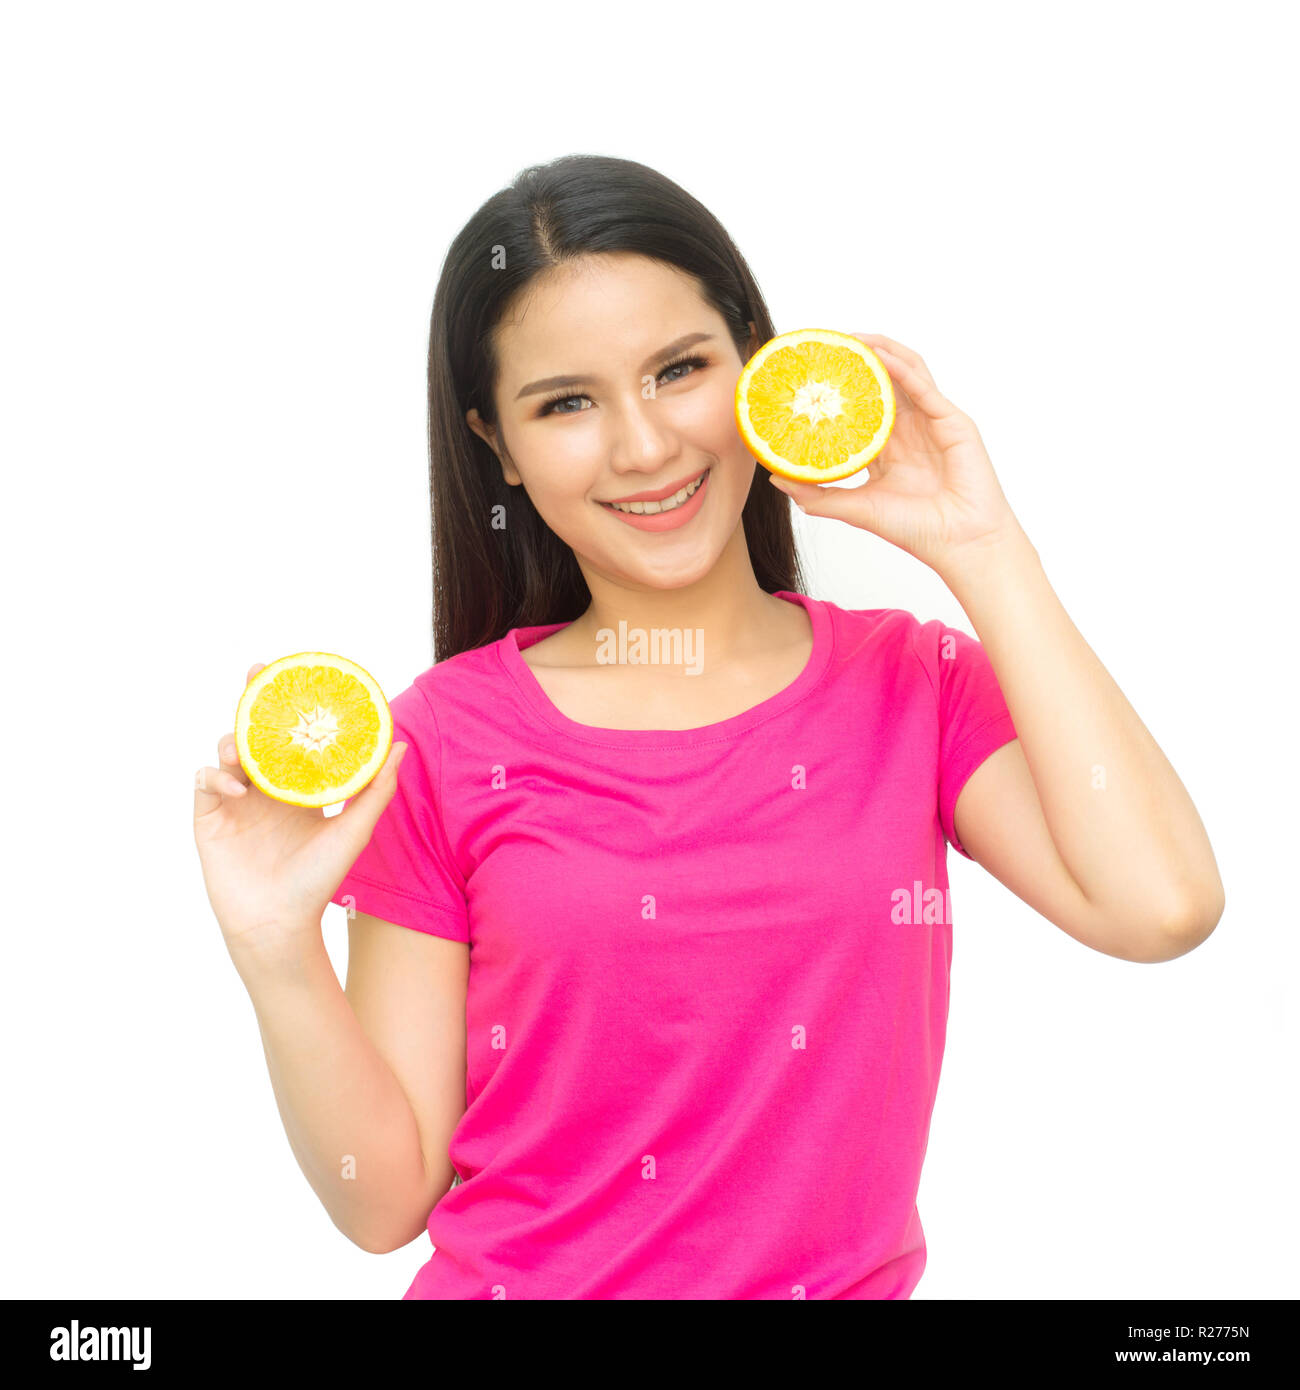 Health girl show yellow orange with smile face isolated on white background, healthy eating food concept Stock Photo